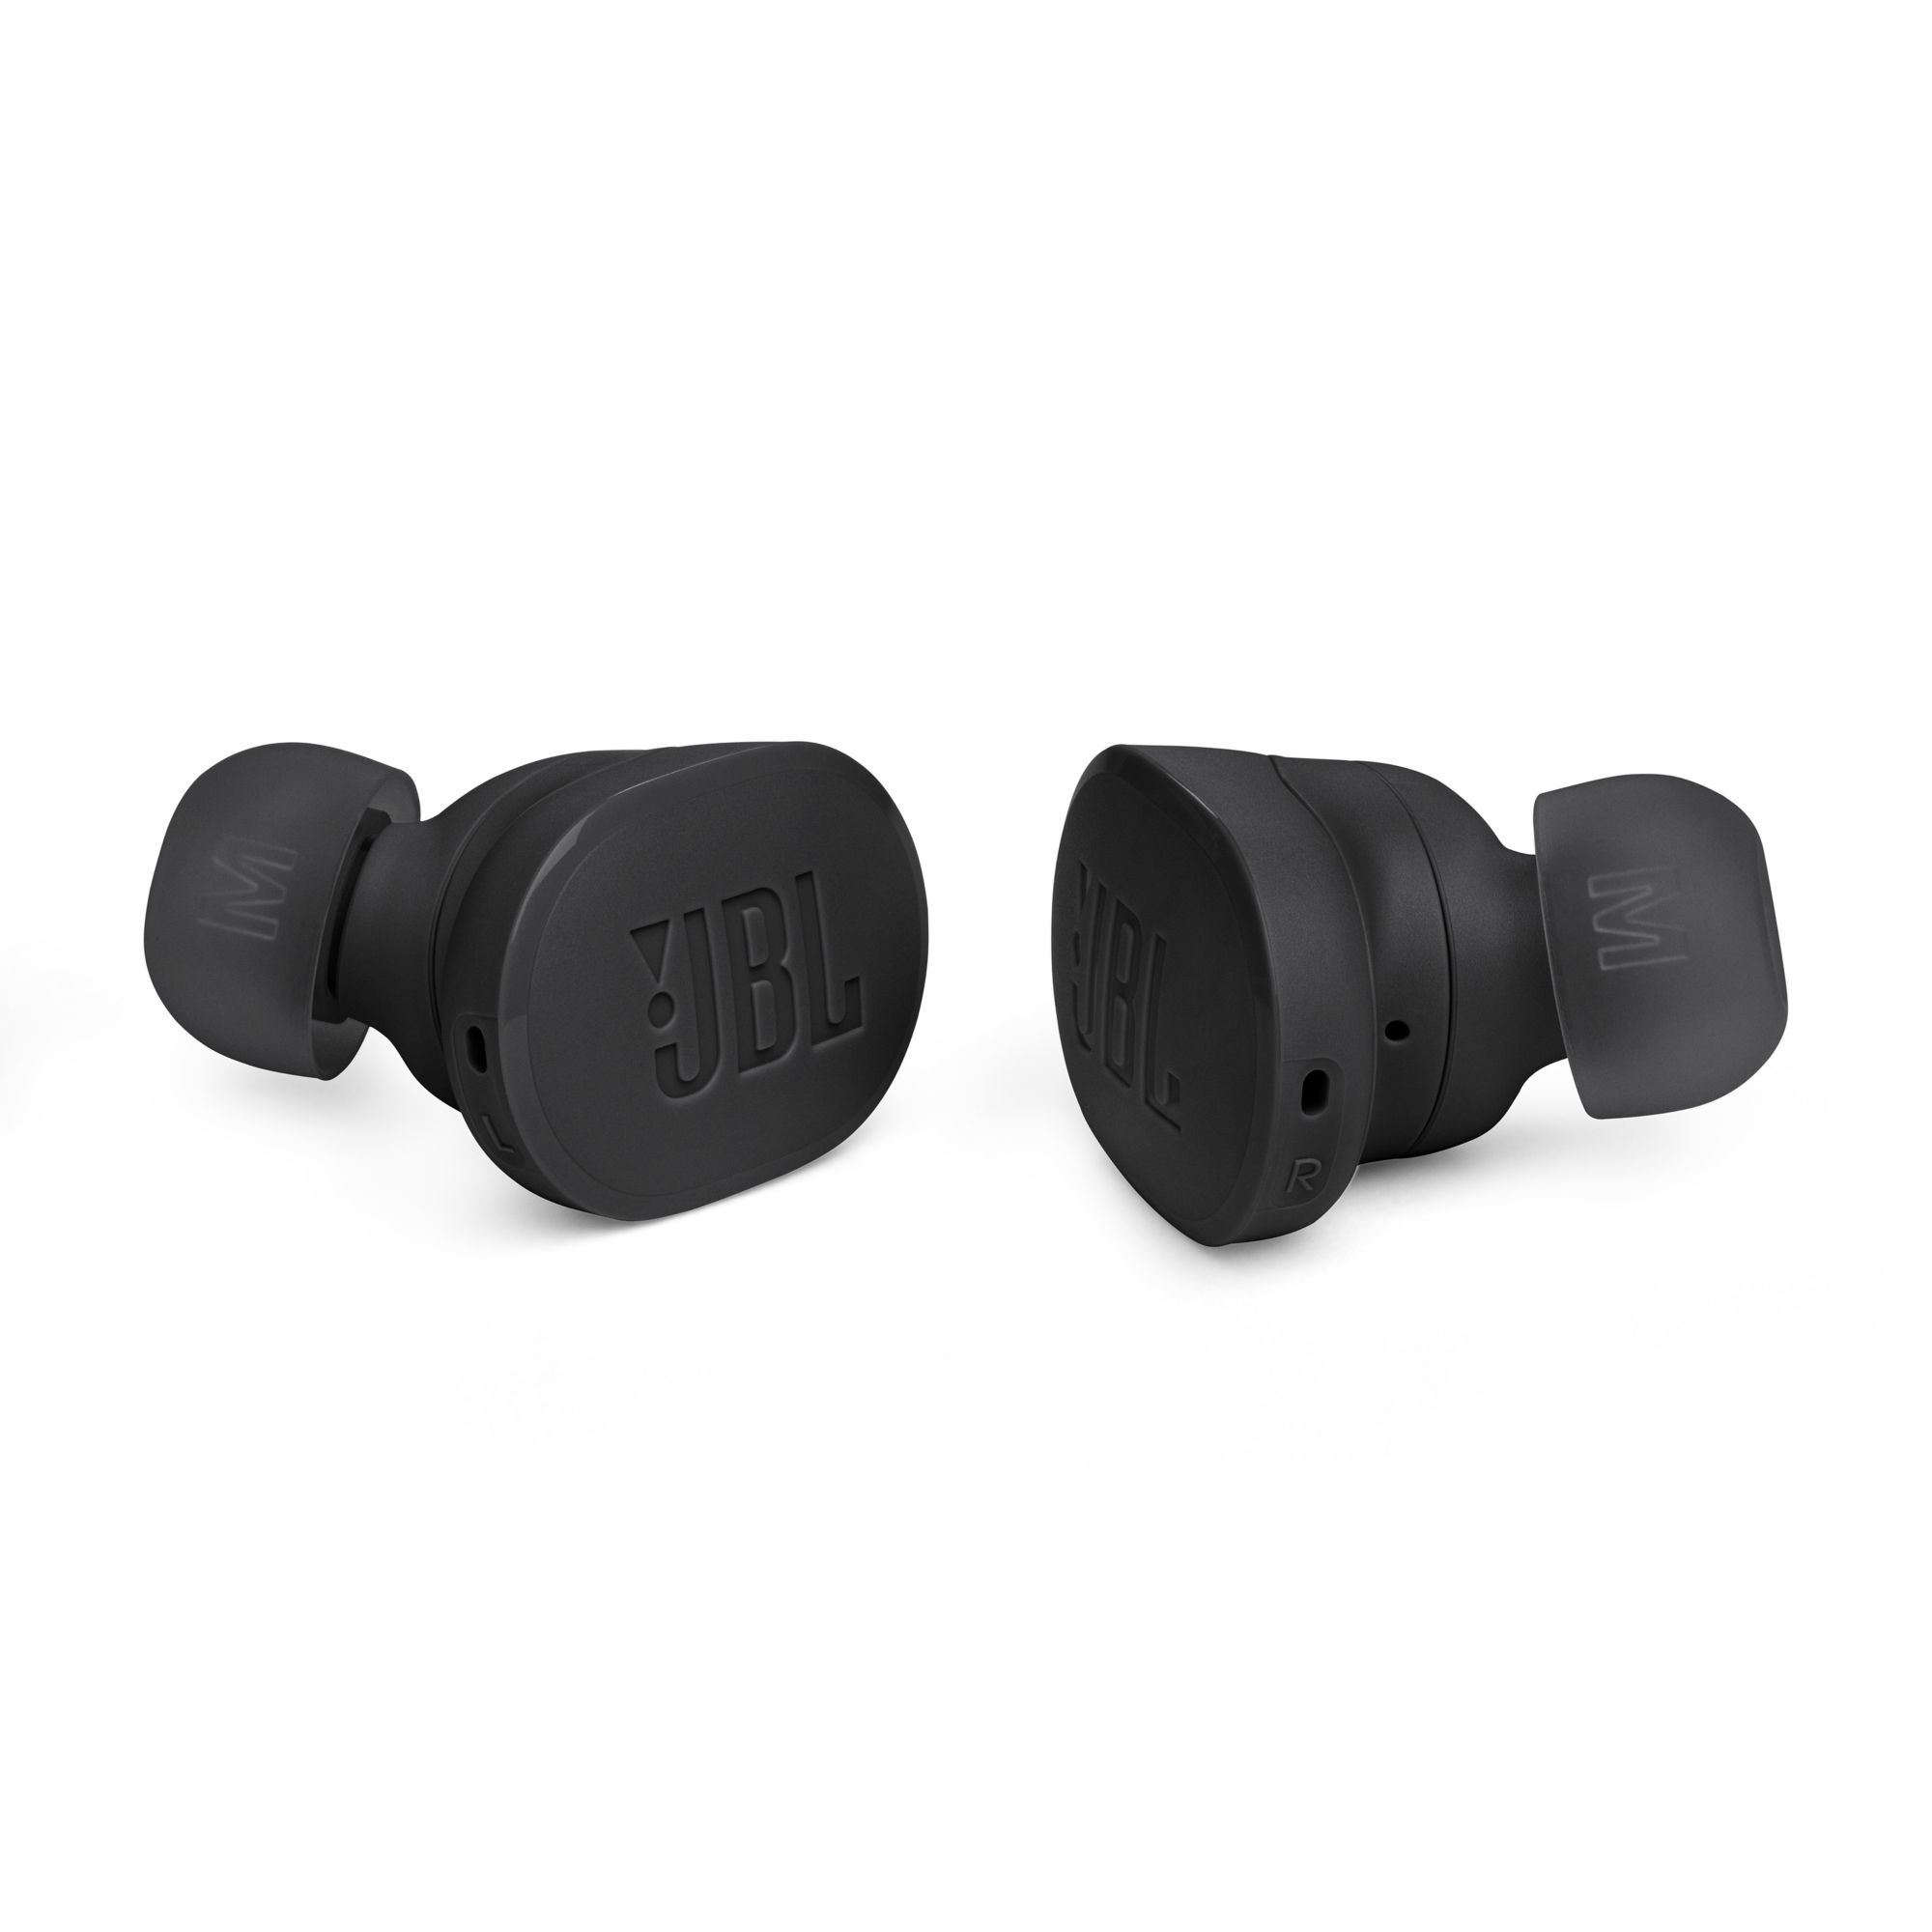 From JBL Tune Buds To Truke BTG Neo, New TWS Earbuds Launched In